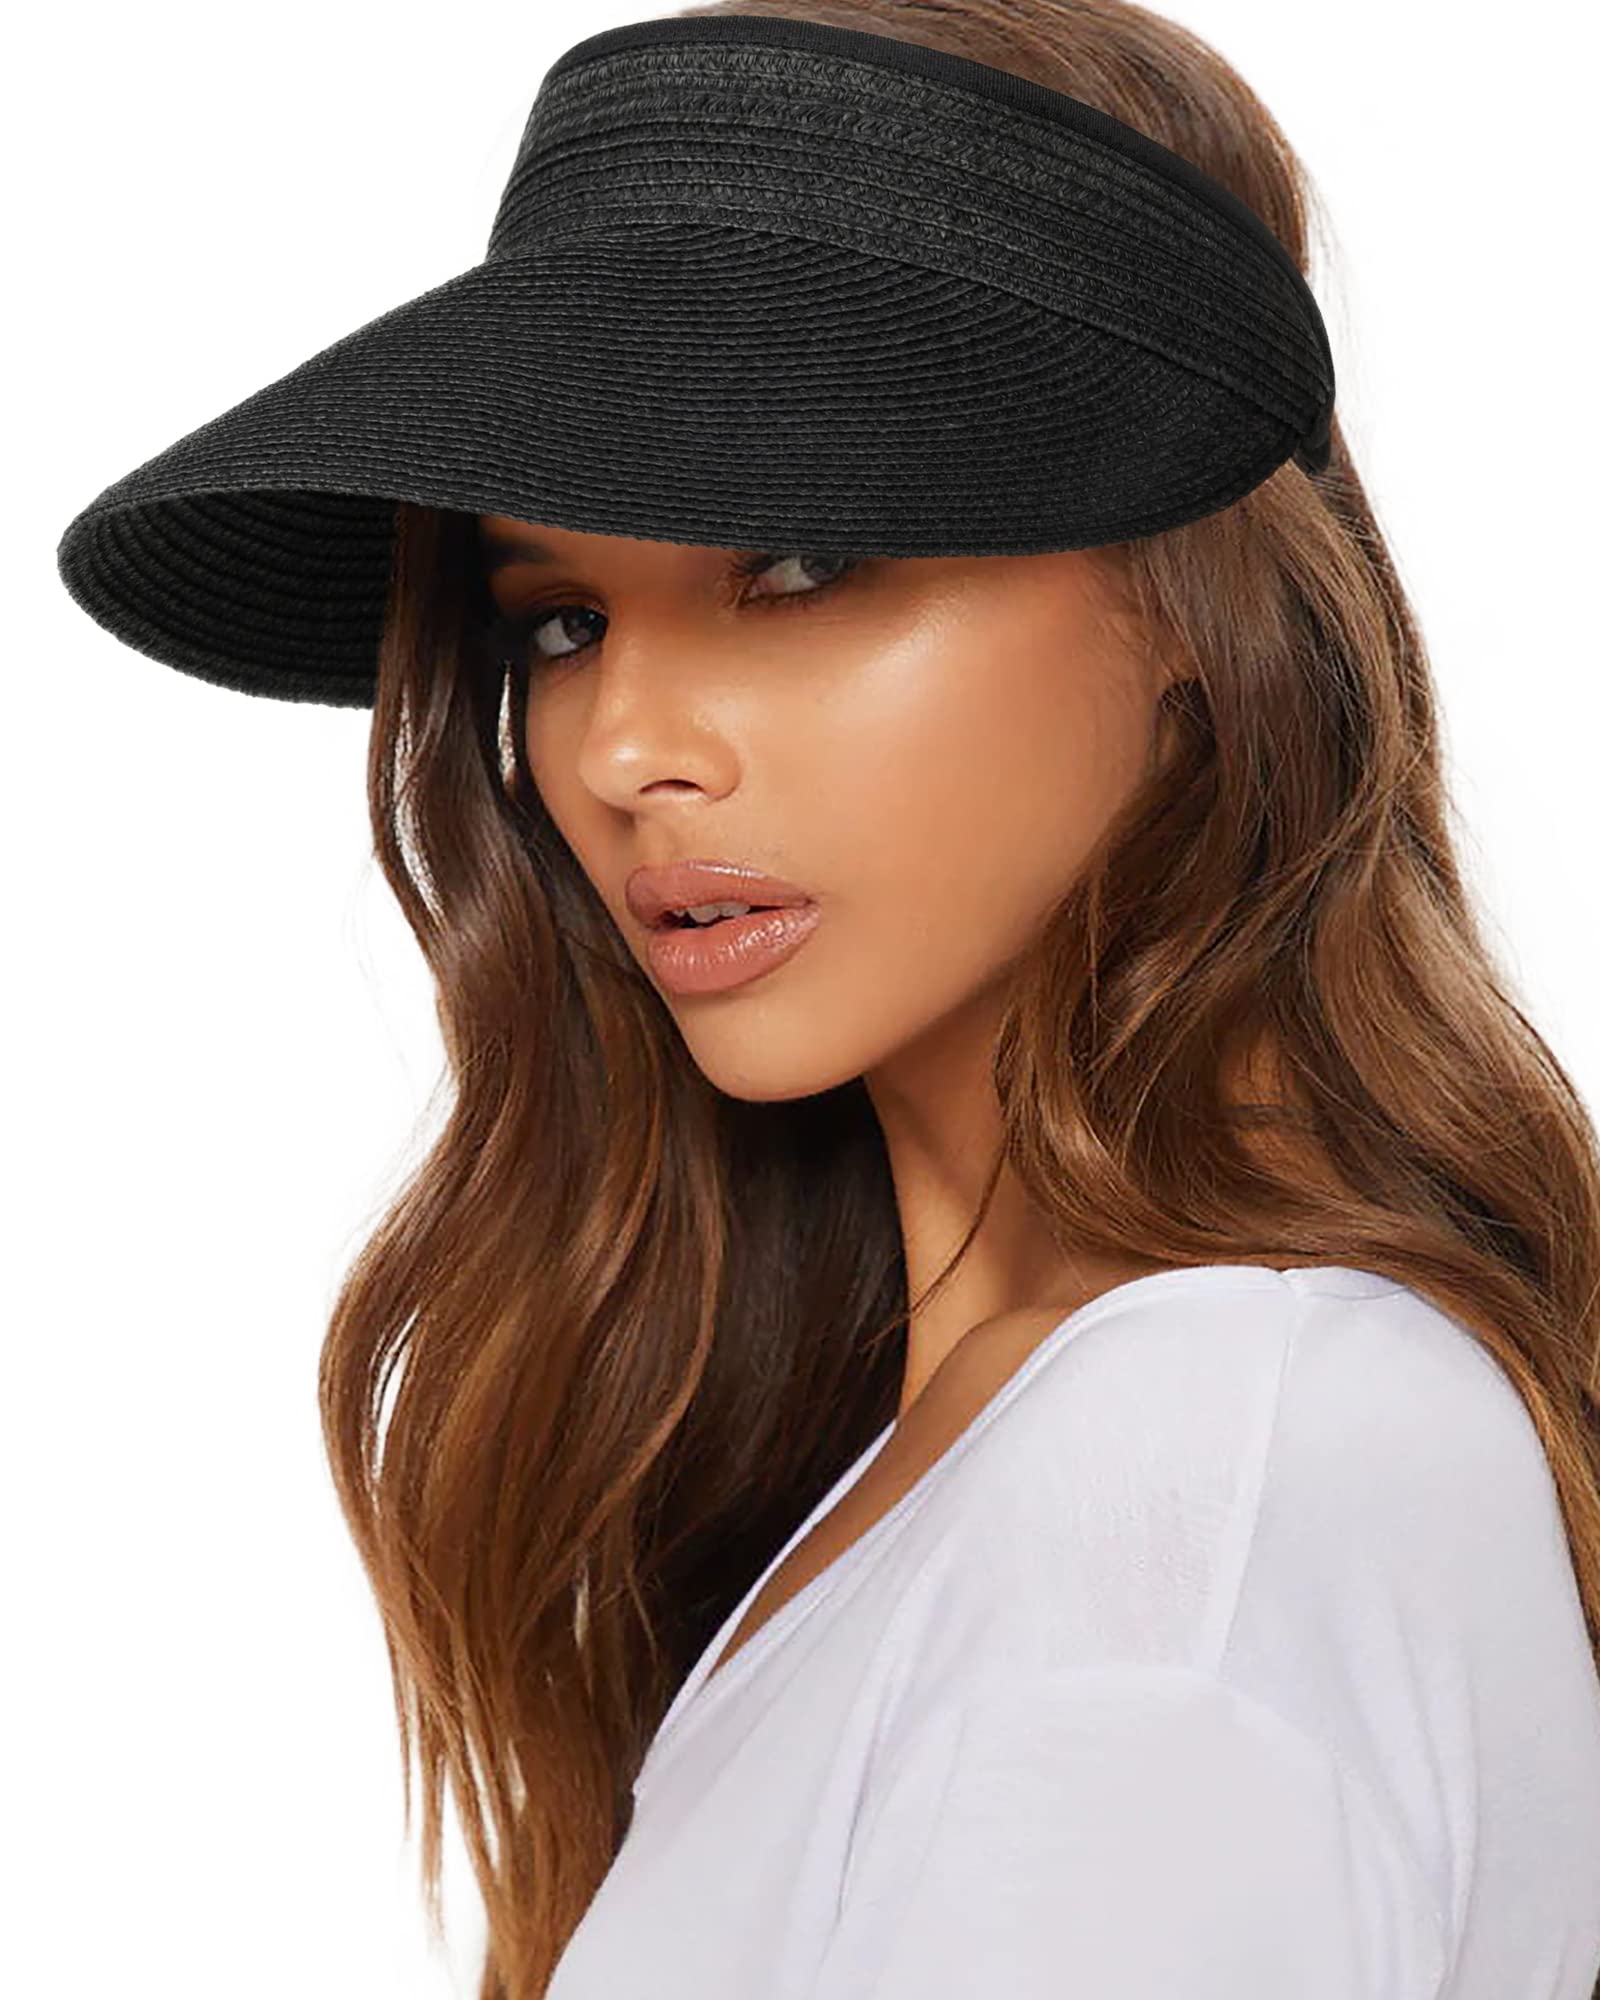 Sun Hats for Women UV Protection Sun Visor Wide Brim Summer Hats with Ponytail